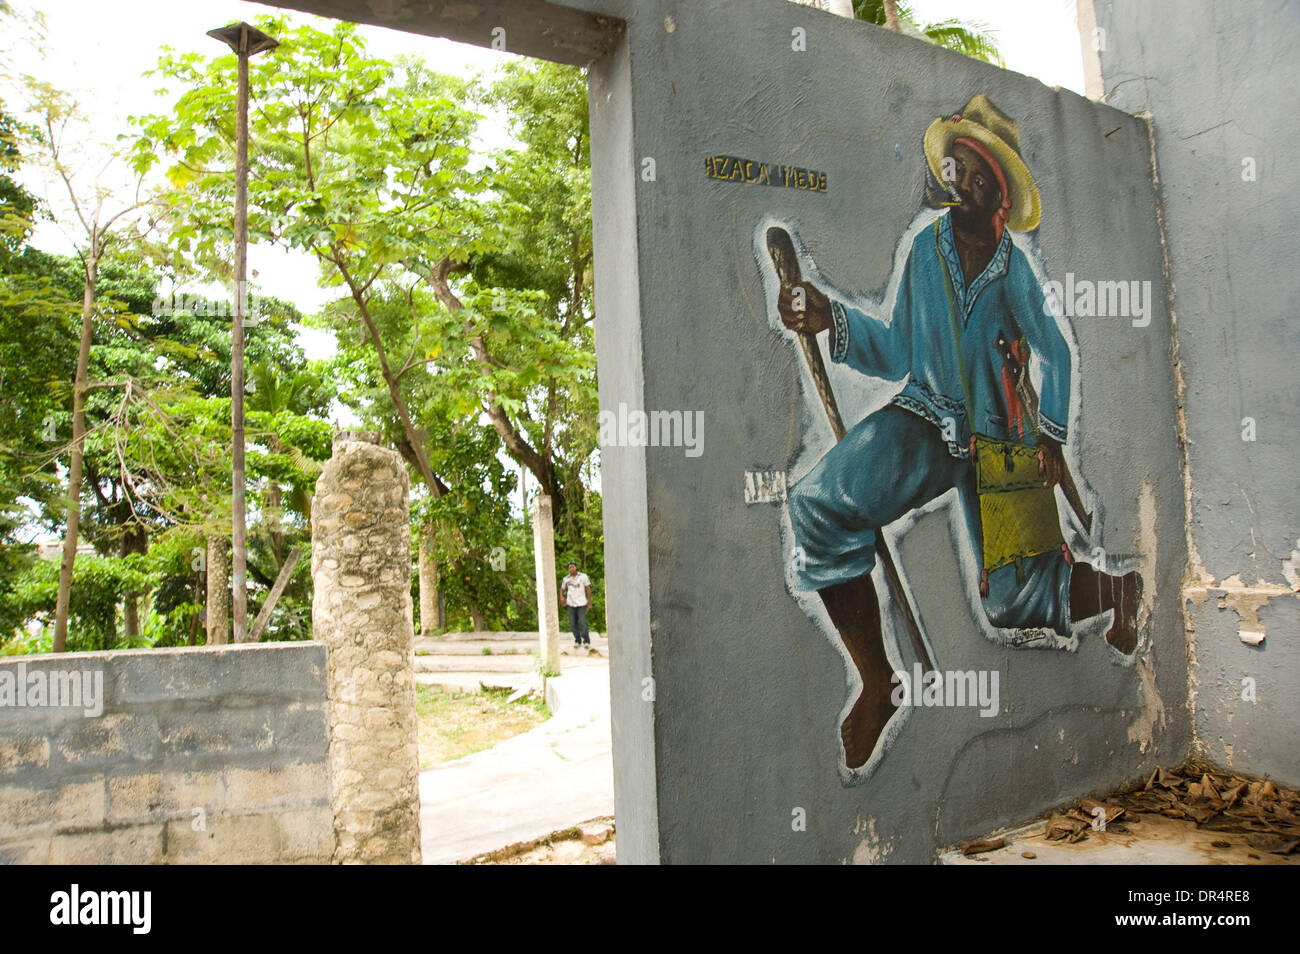 Apr 30, 2009 - Port au Prince, Haiti - The former home of famed American dancer Katherine Dunham who lived in the Carrefours community of Port au Prince off and on until her death in 2006. Art painting on wall. (Credit Image: © David Snyder/ZUMA Press) Stock Photo